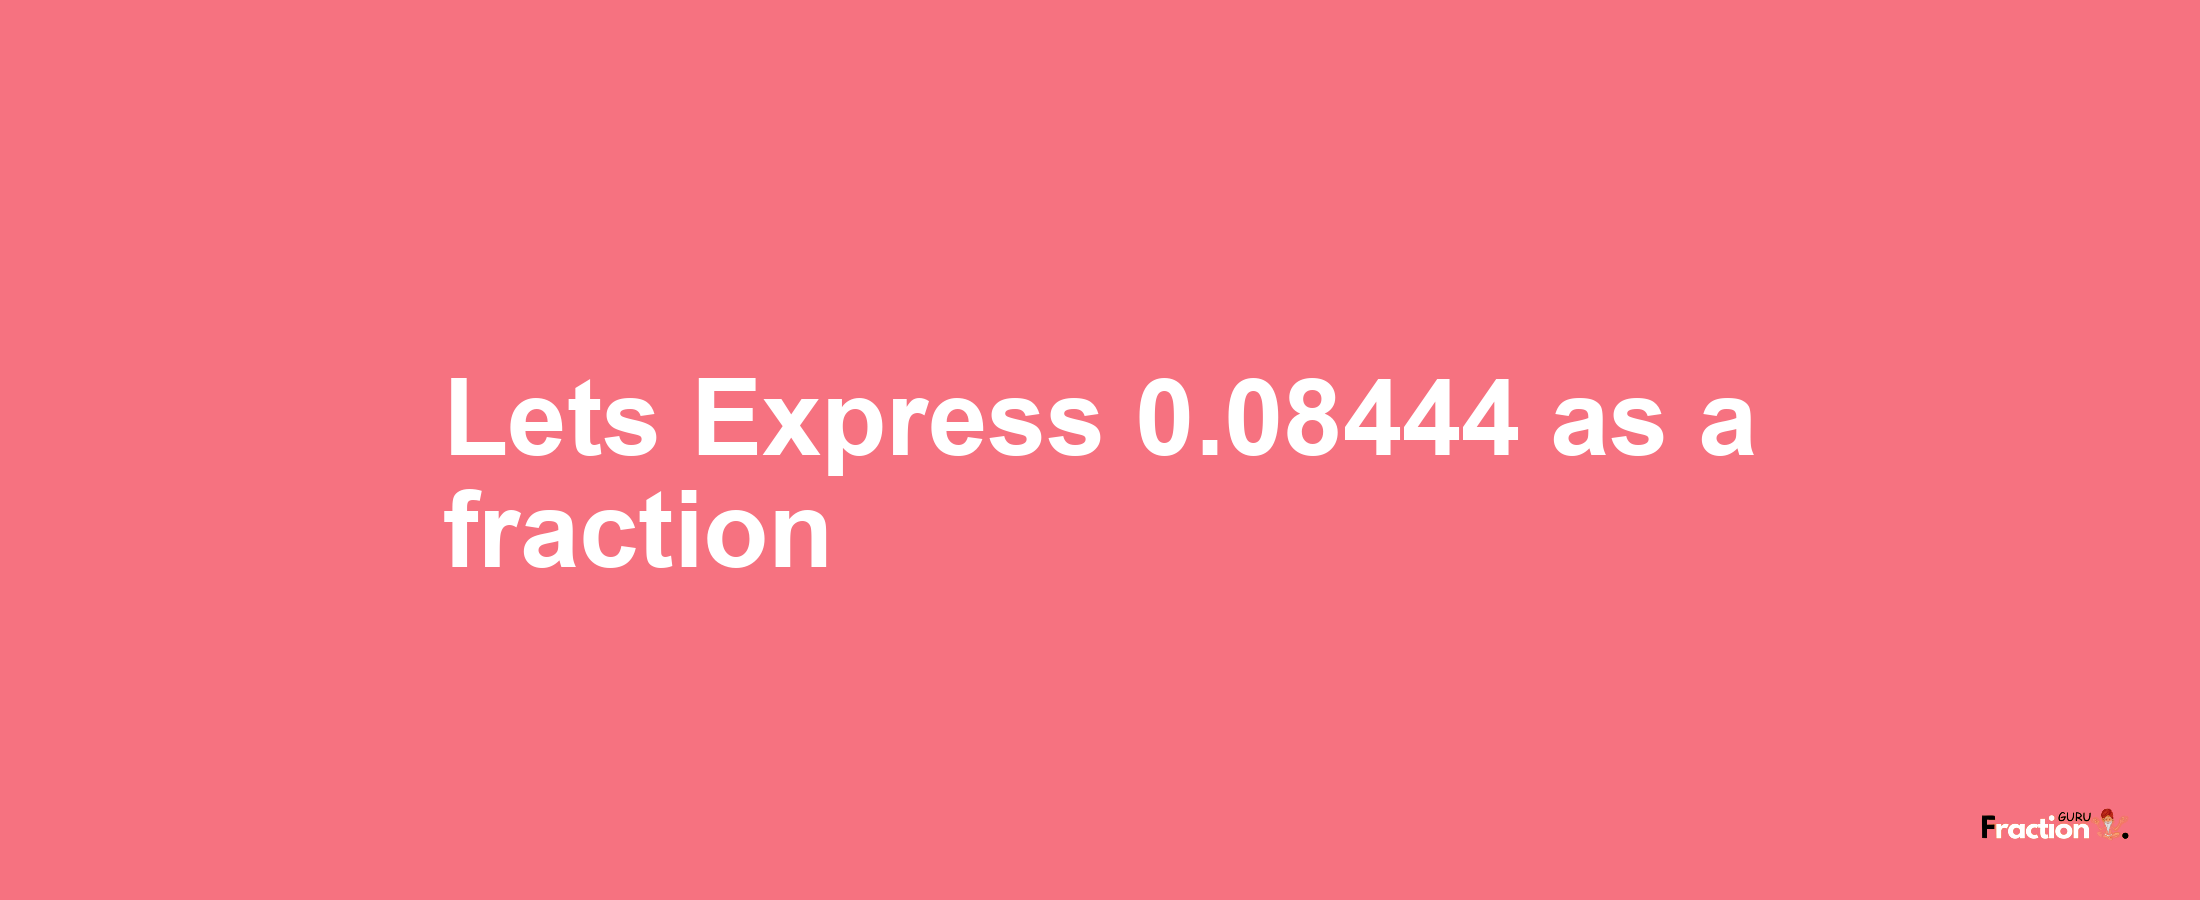 Lets Express 0.08444 as afraction